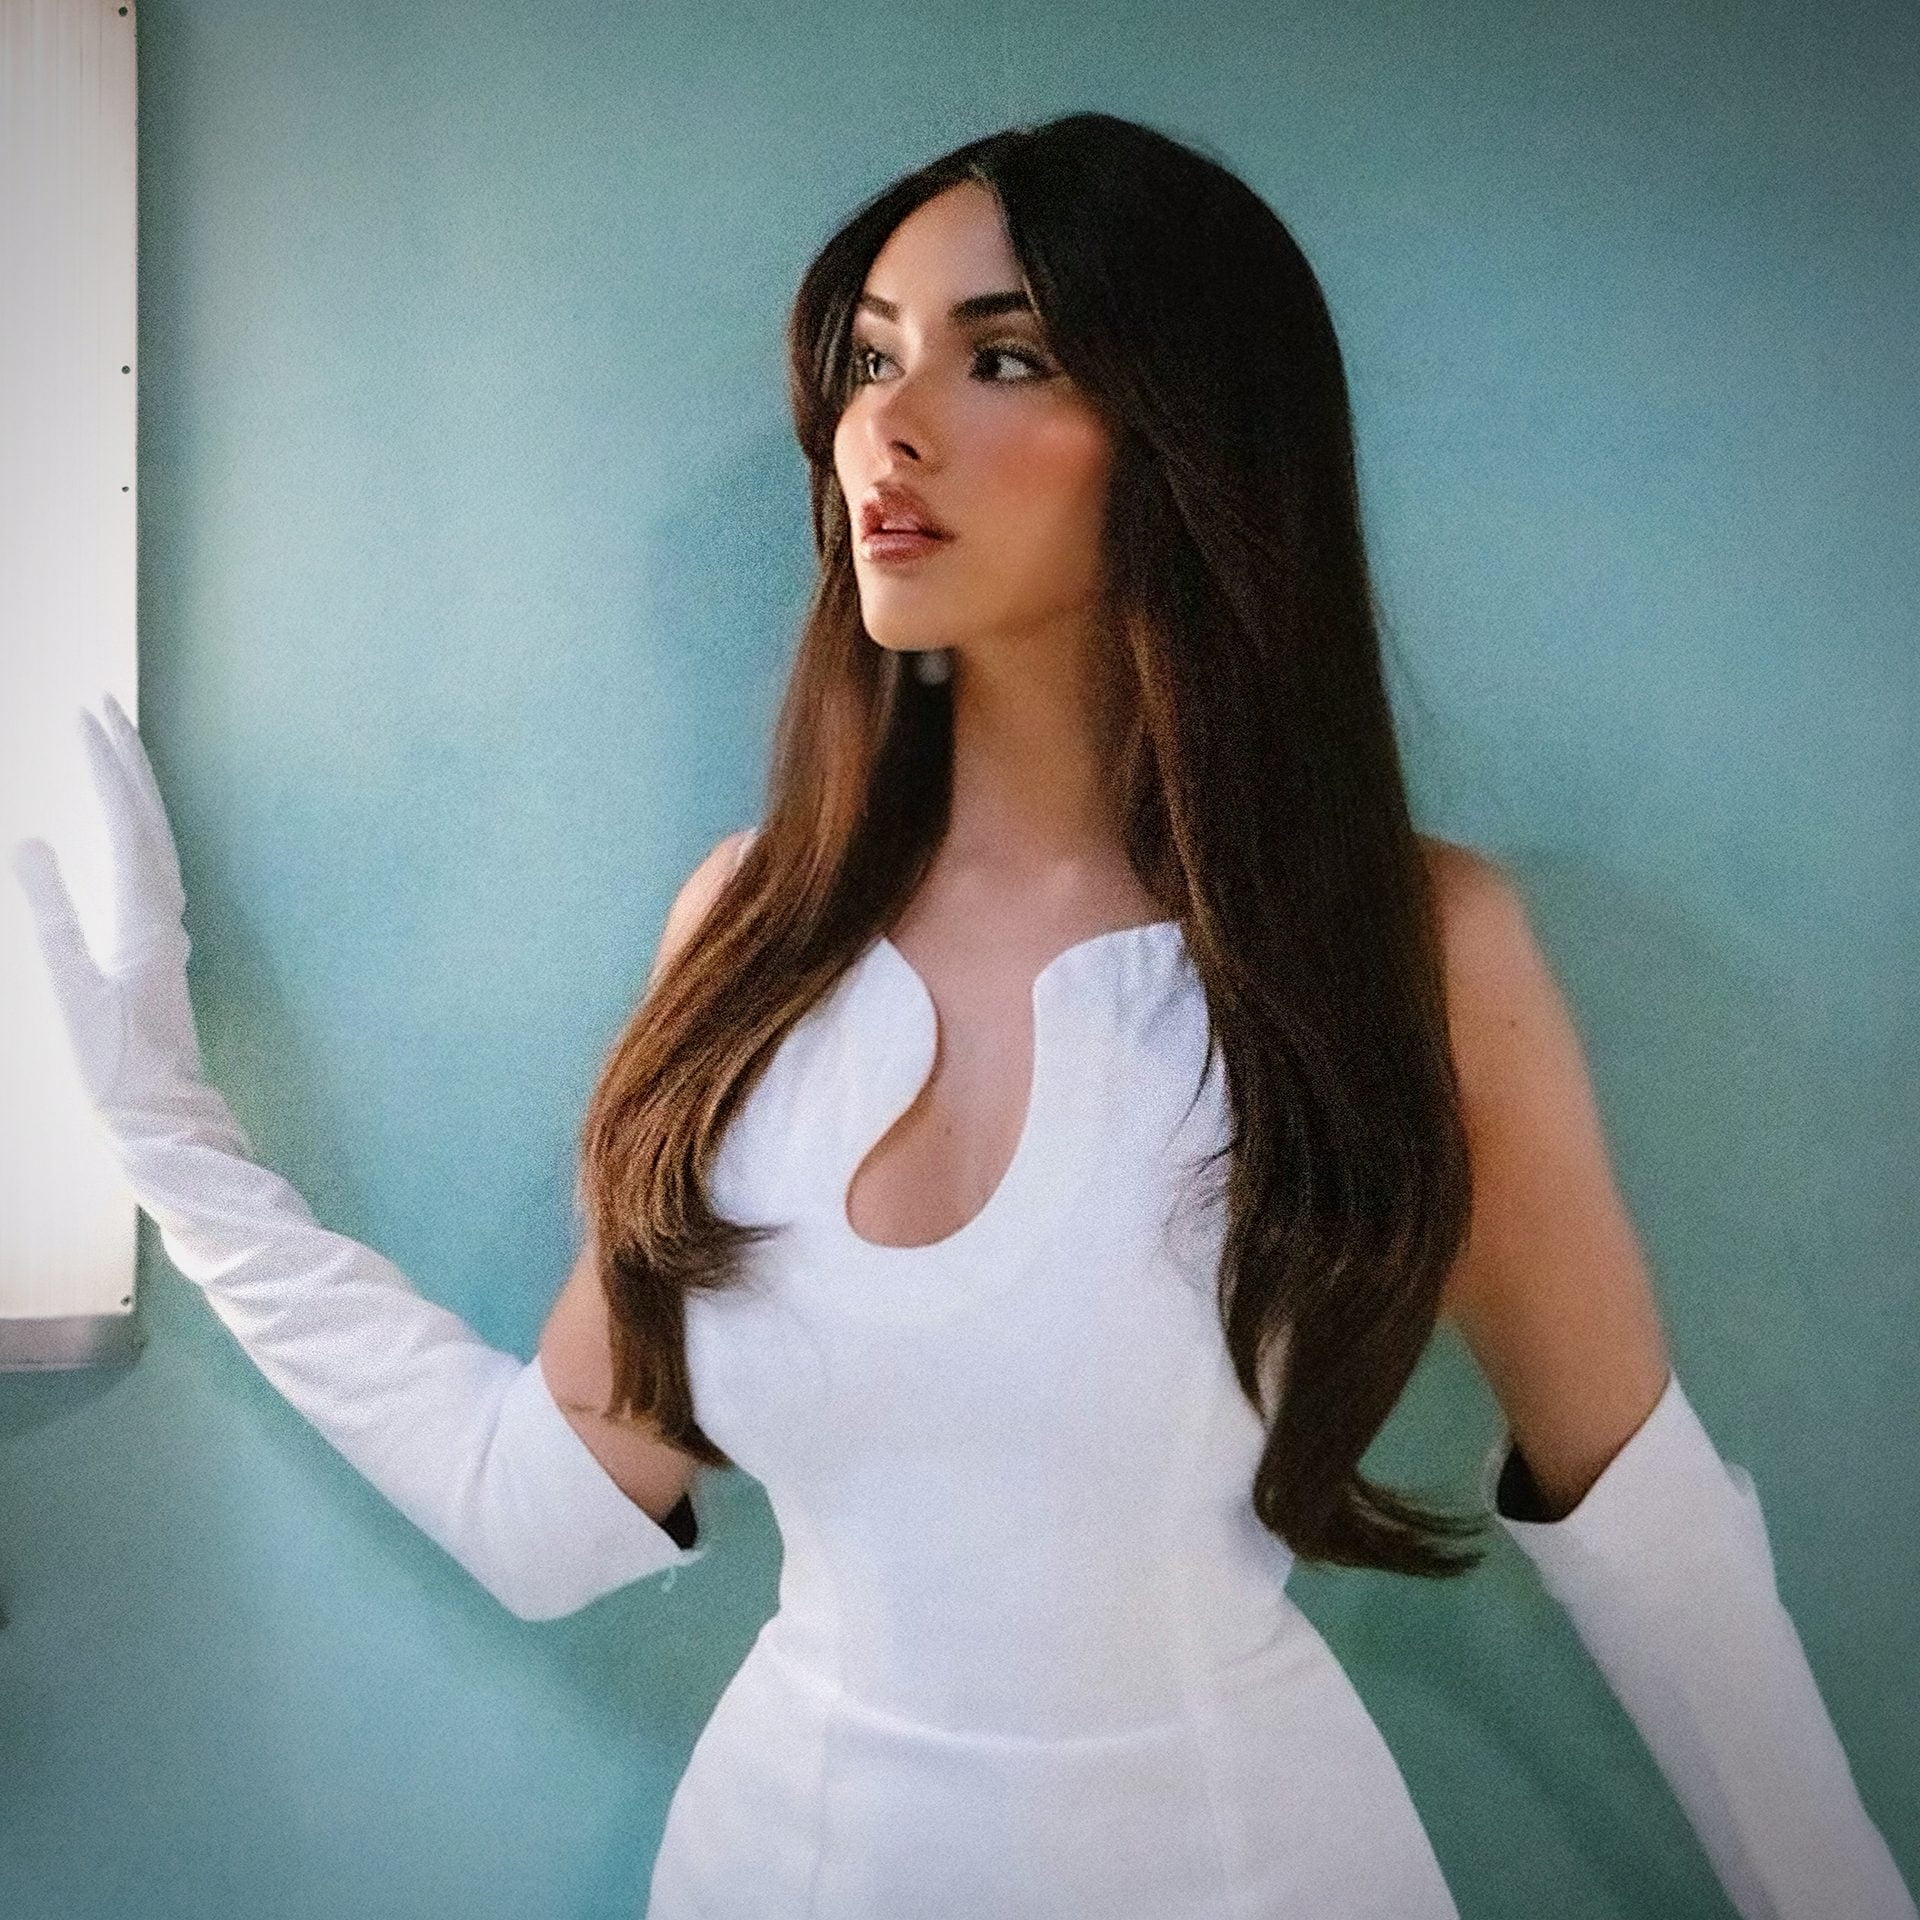 Madison Beer and Timbaland release Platinum-selling singer, songwriter, and producer Madison Beer has teamed up with GRAMMY-winning producer Timbaland Home To Another One Remix via 360 Magazine.